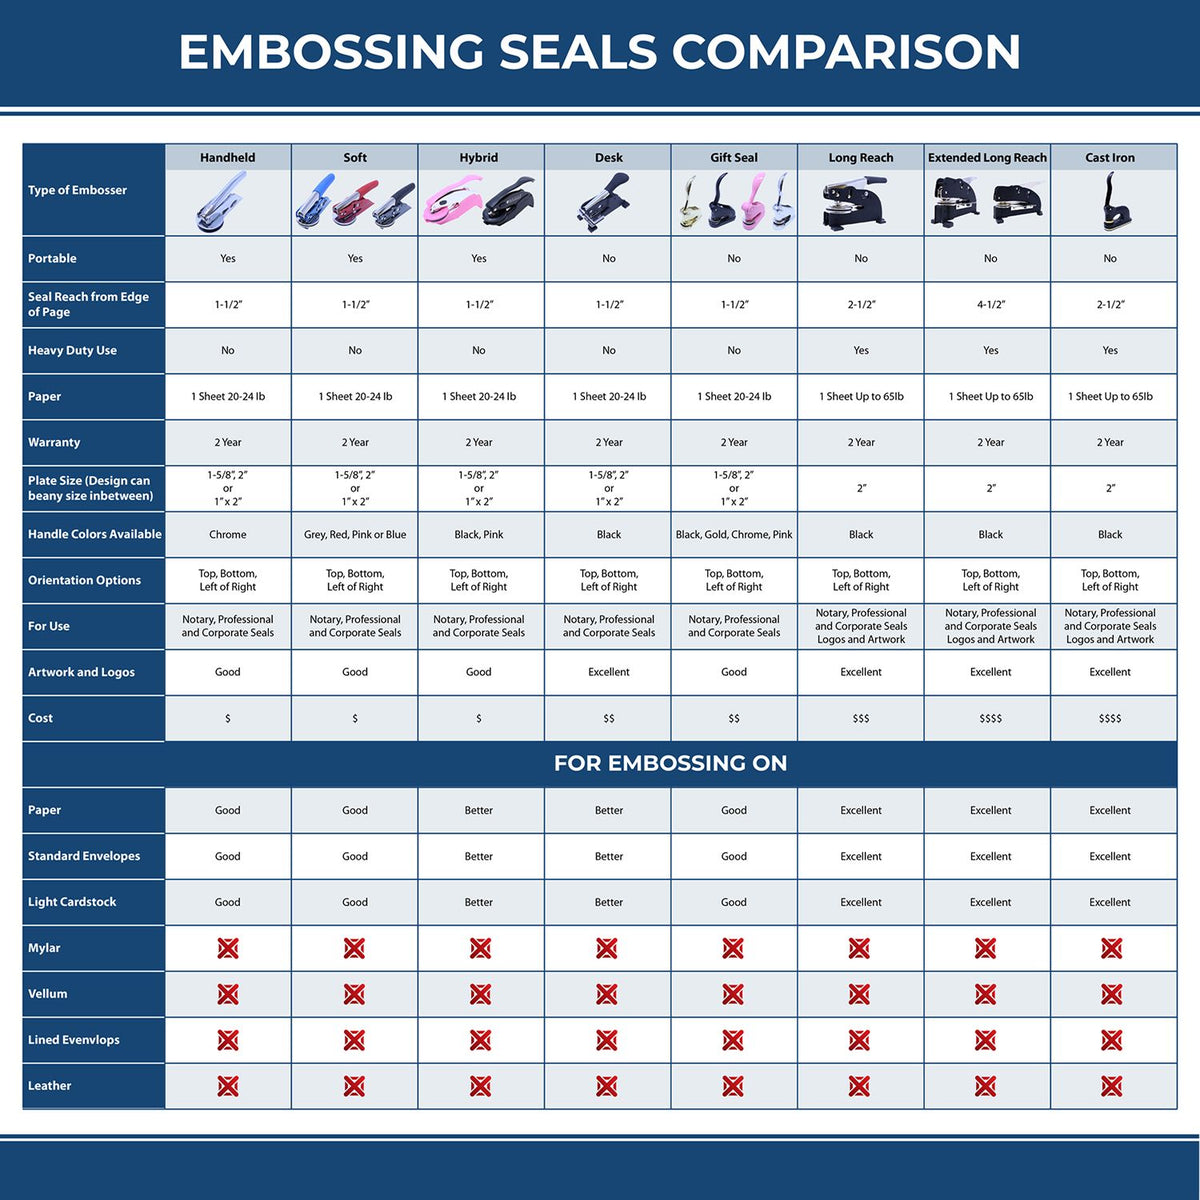 A comparison chart for the different types of mount models available for the Soft Arkansas Professional Geologist Seal